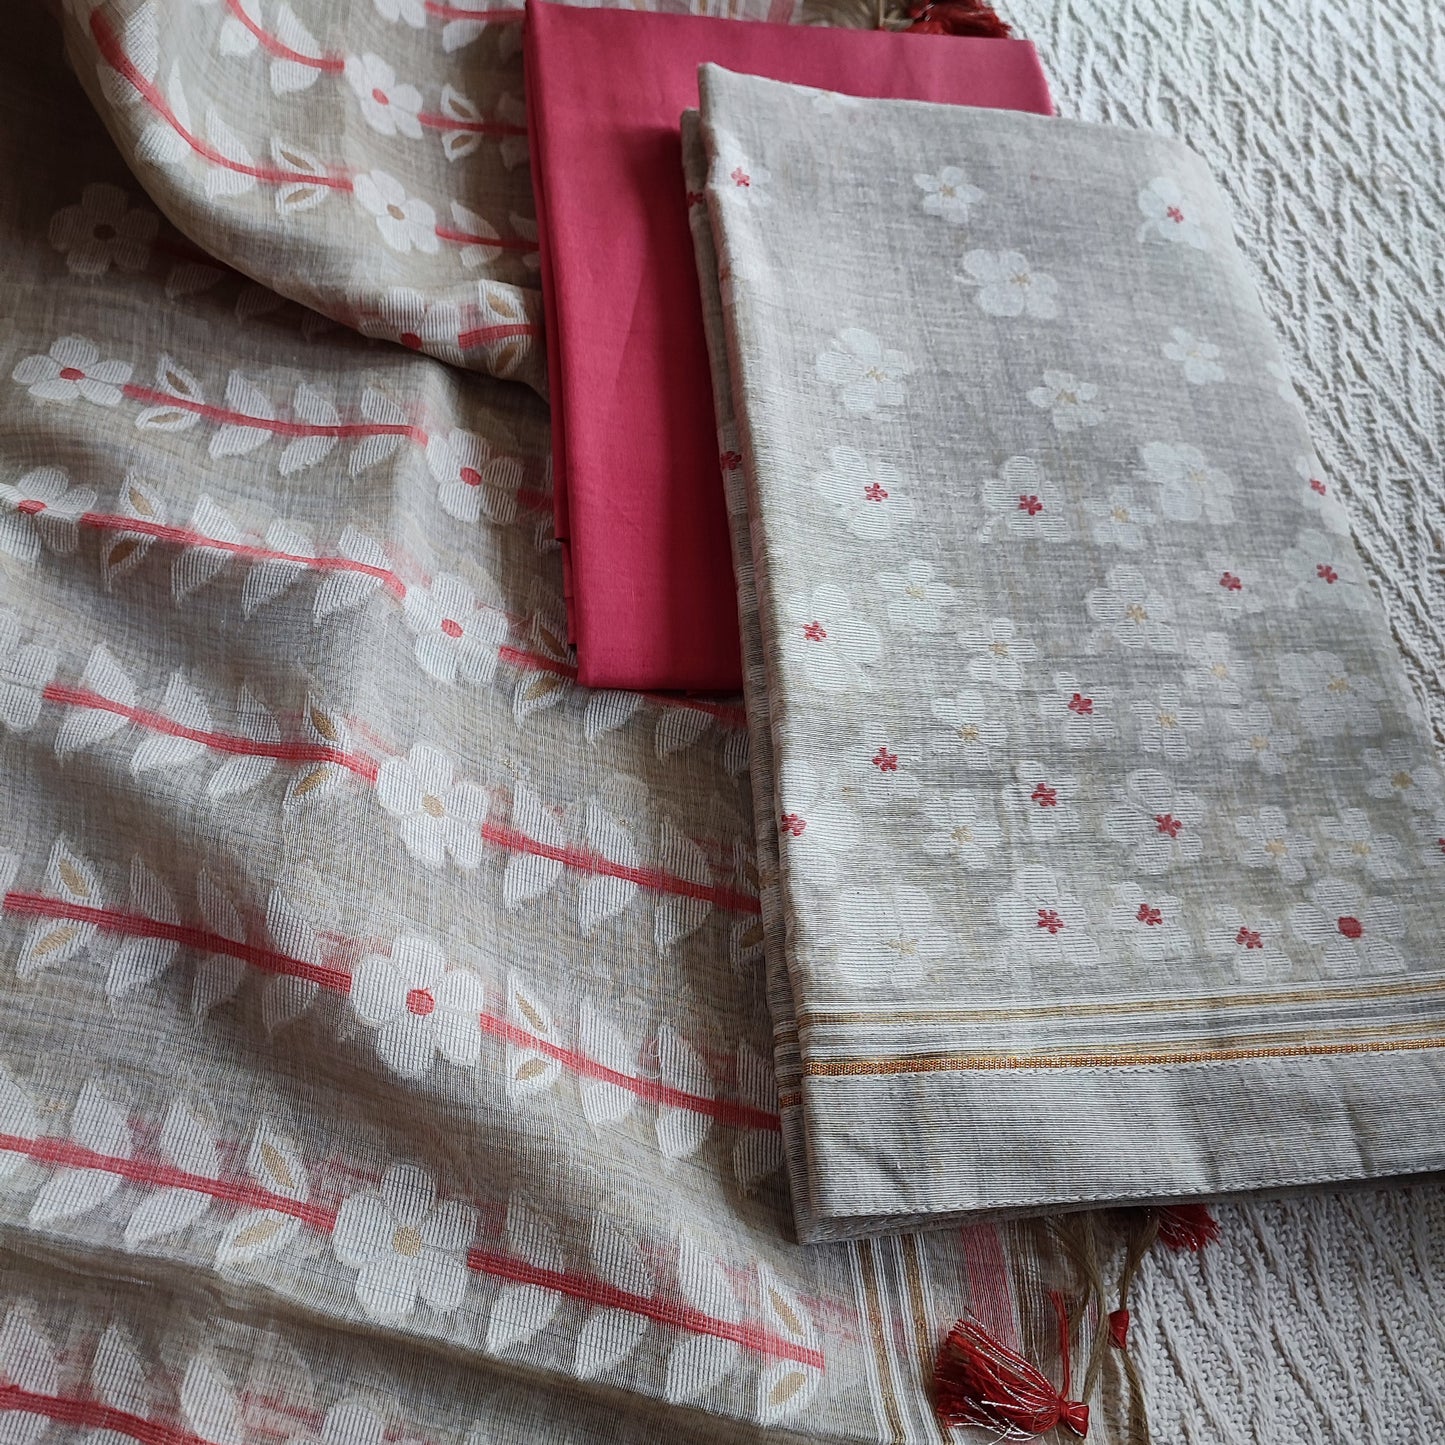 Hint Of Red And Beige Chanderi Silk by Resham Woven Jamdani Suit